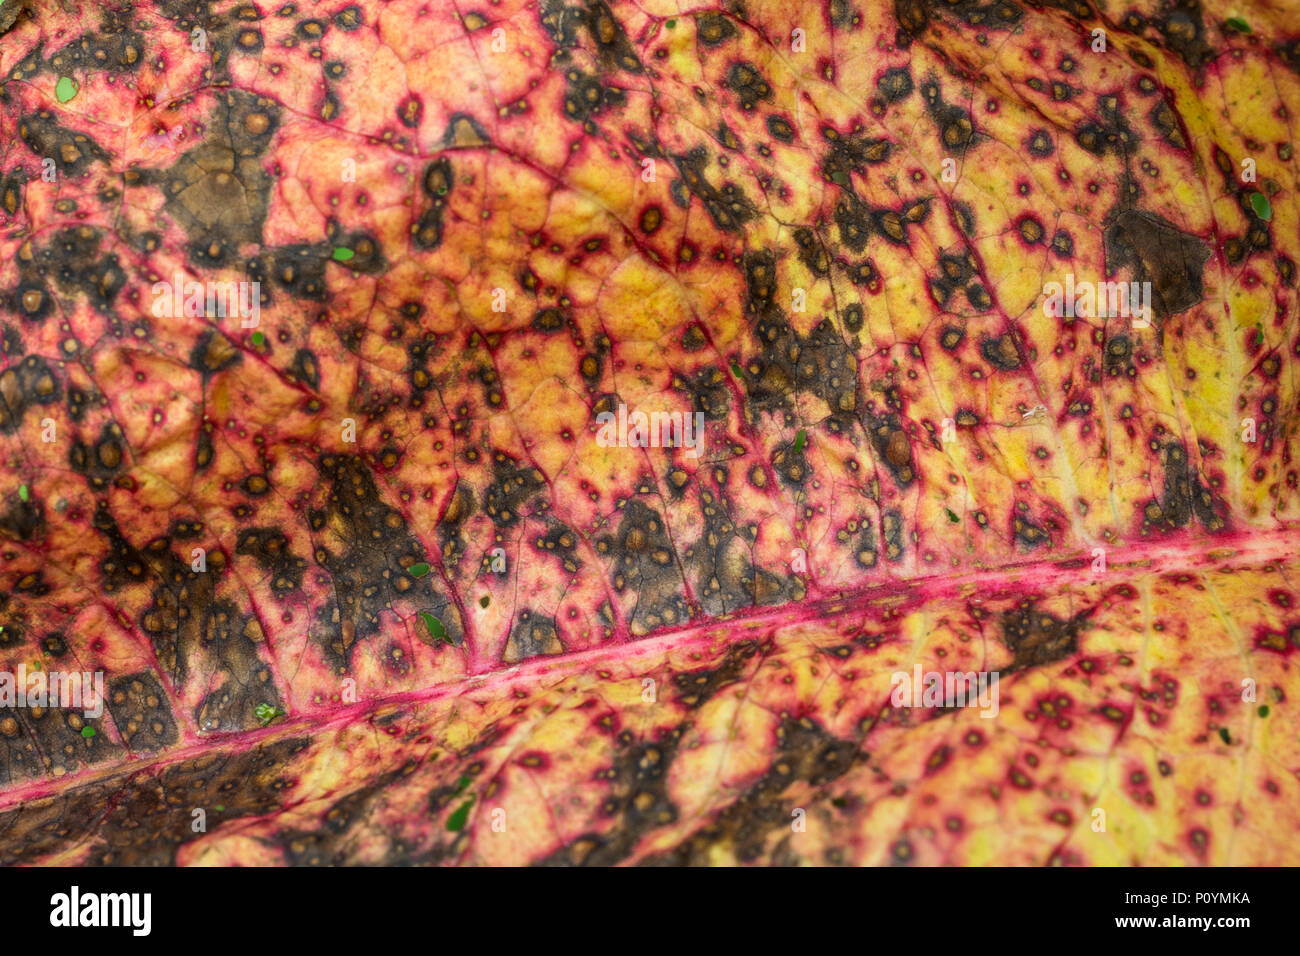 Abstract macro photo of the surface of diseased leaf of Broad-Leaved Dock / Rumex obtusifolius. Possibly caused by the leaf spot Ramularia rubella. Stock Photo